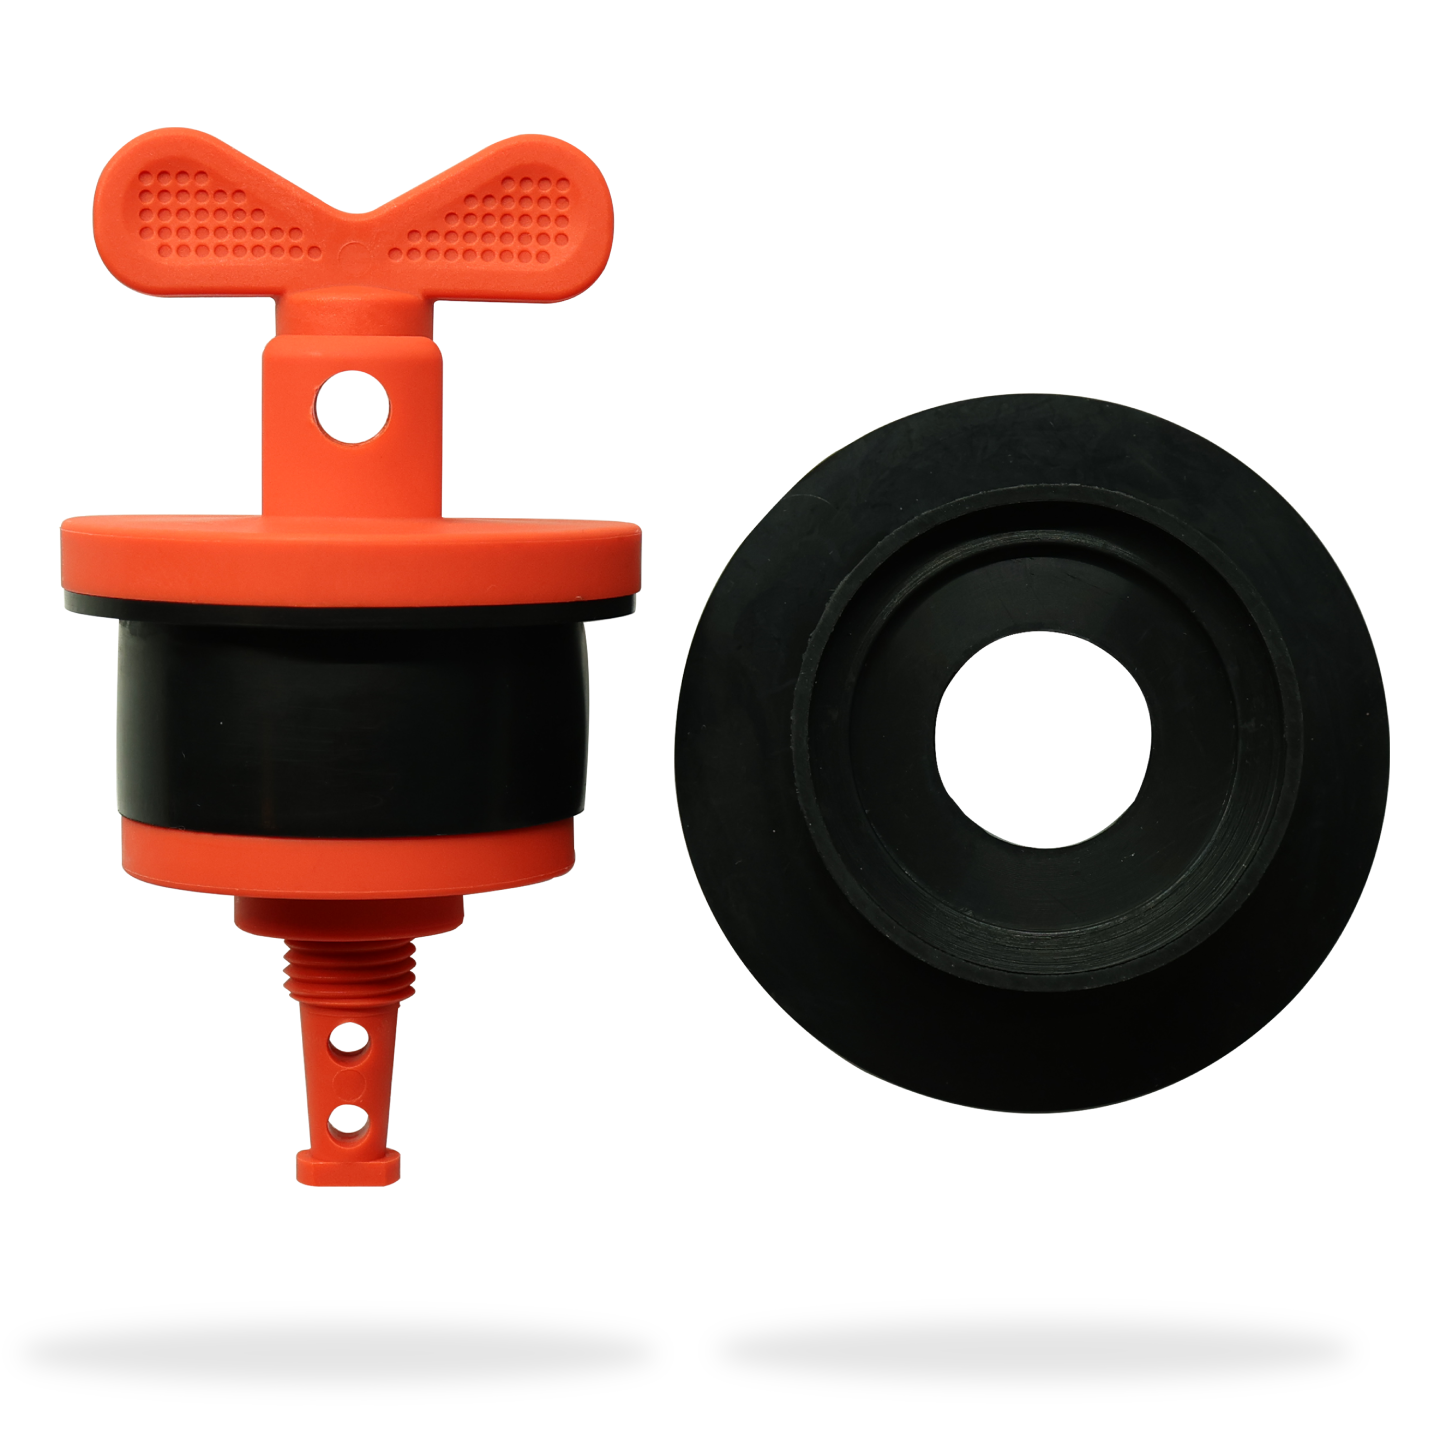 Nylon Drum Security Plug With 2 Rubber Gaskets